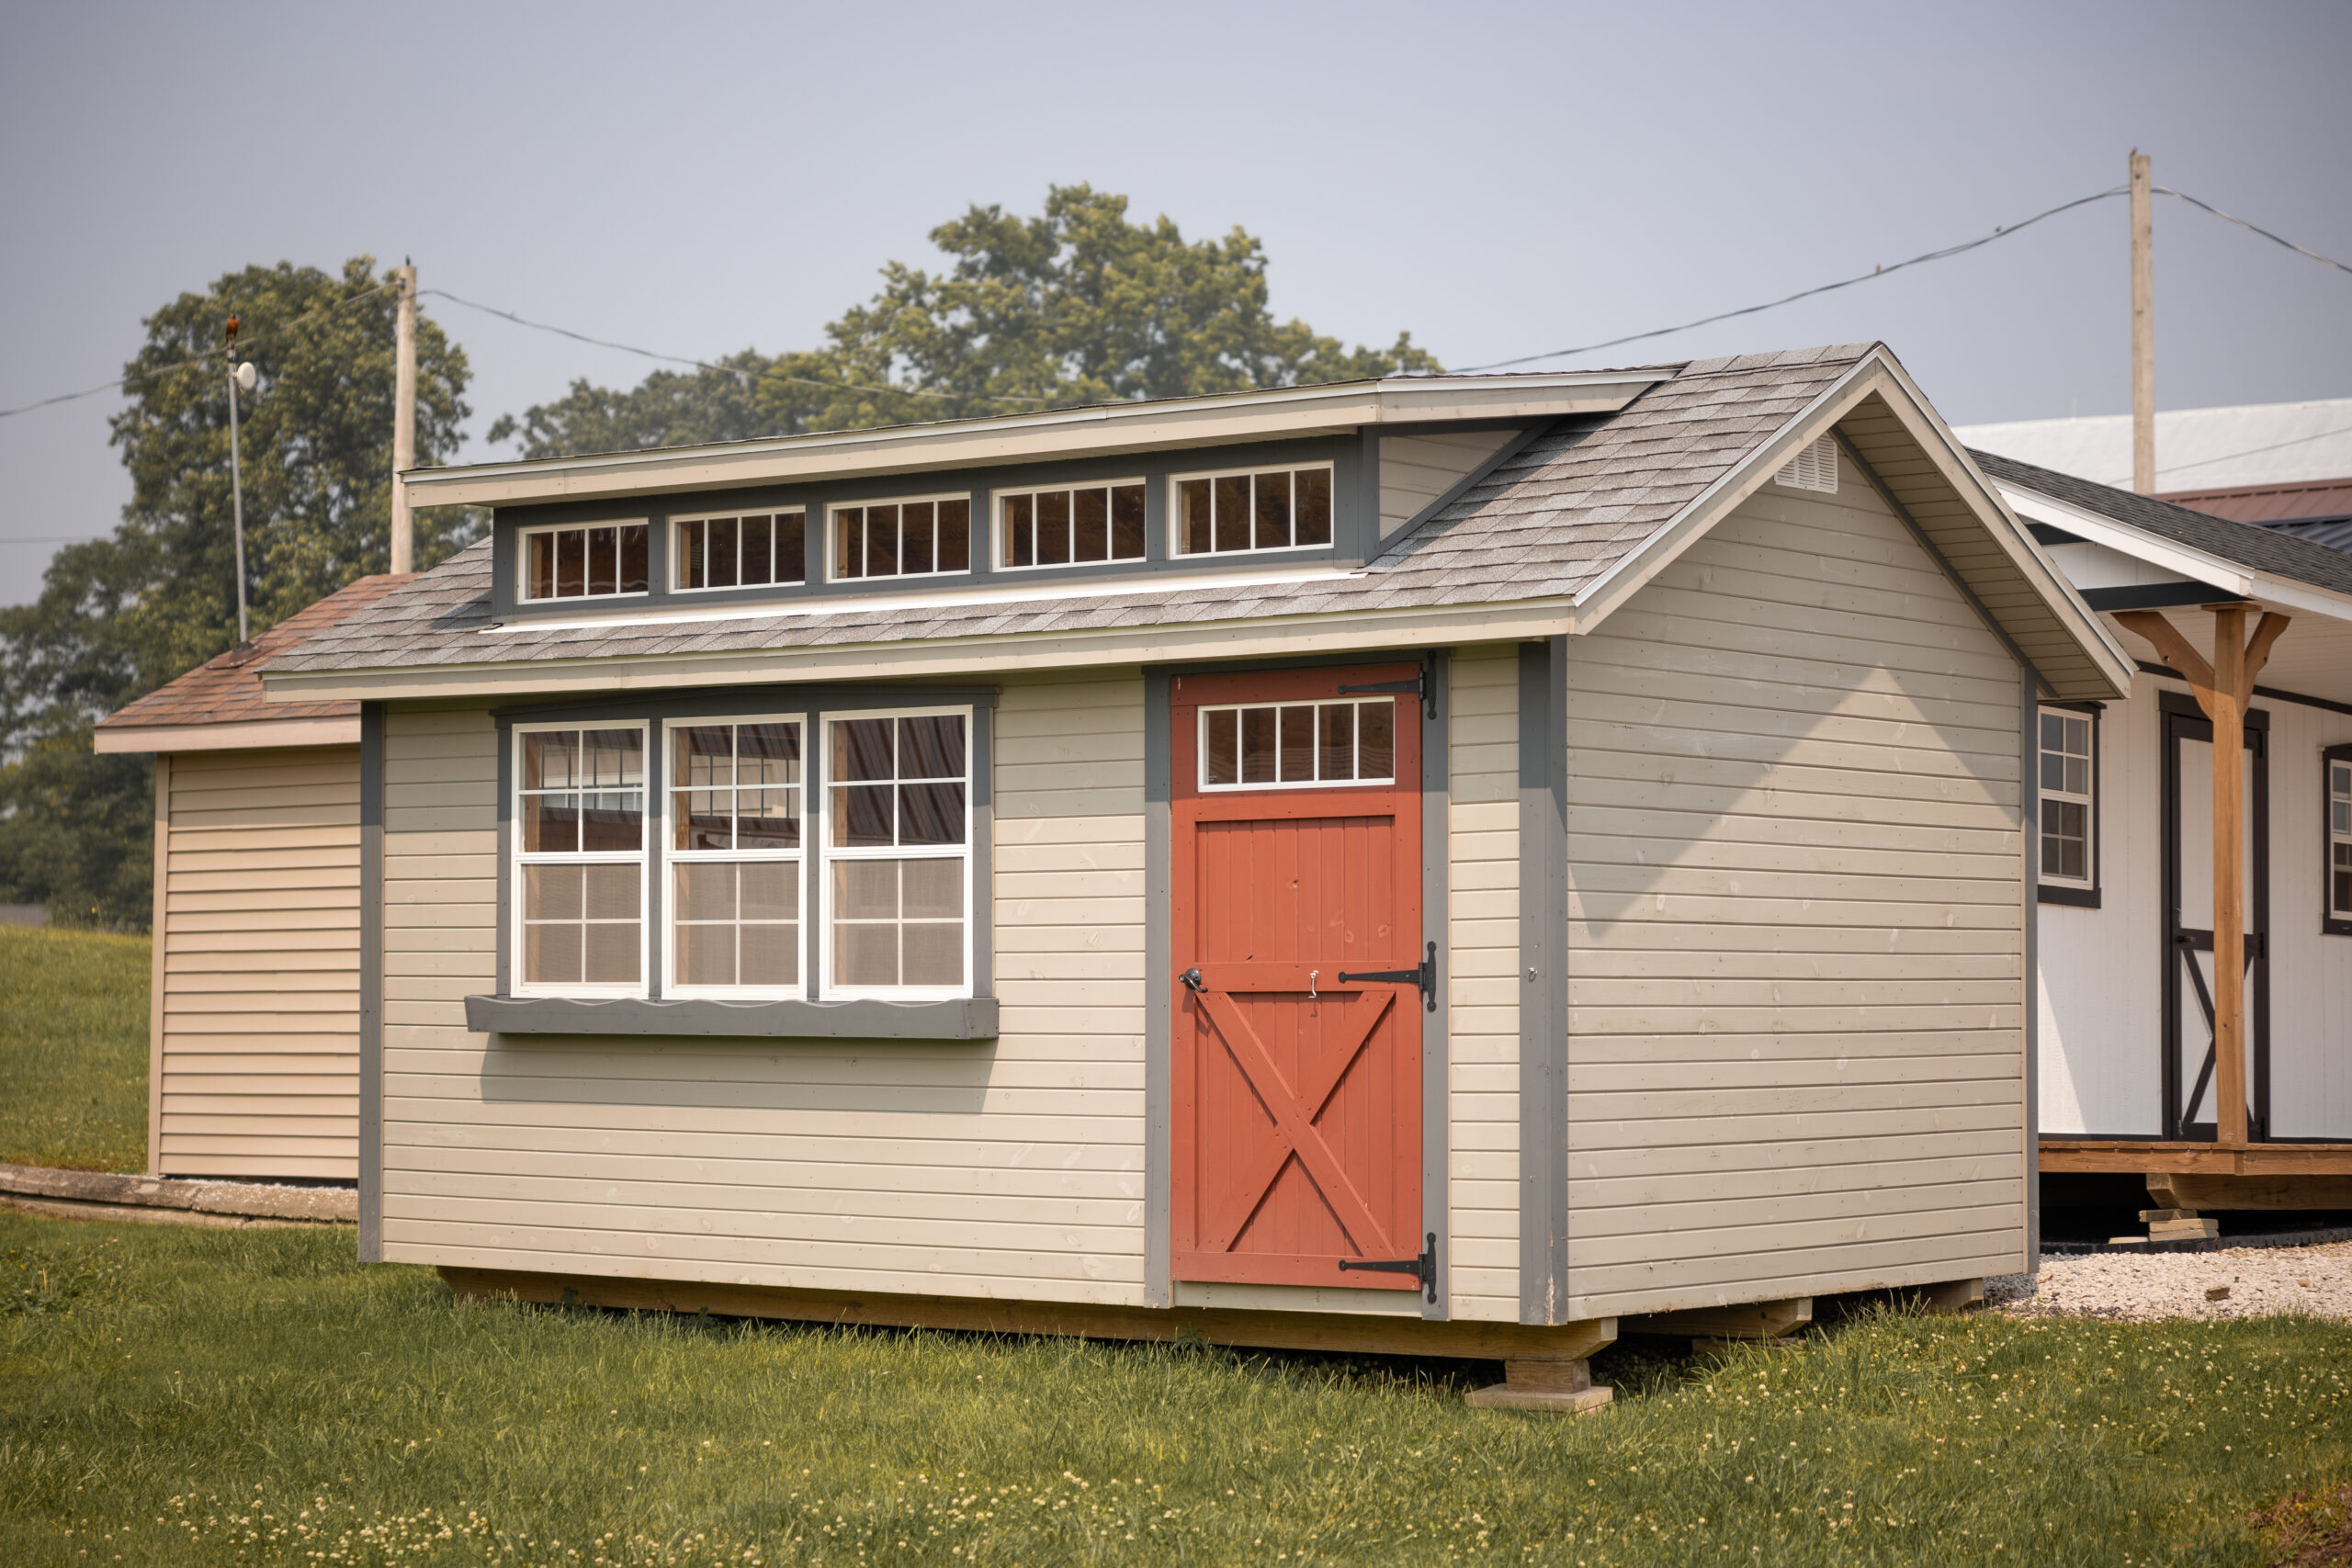 Rent To Own Tan shed with red door and dormer